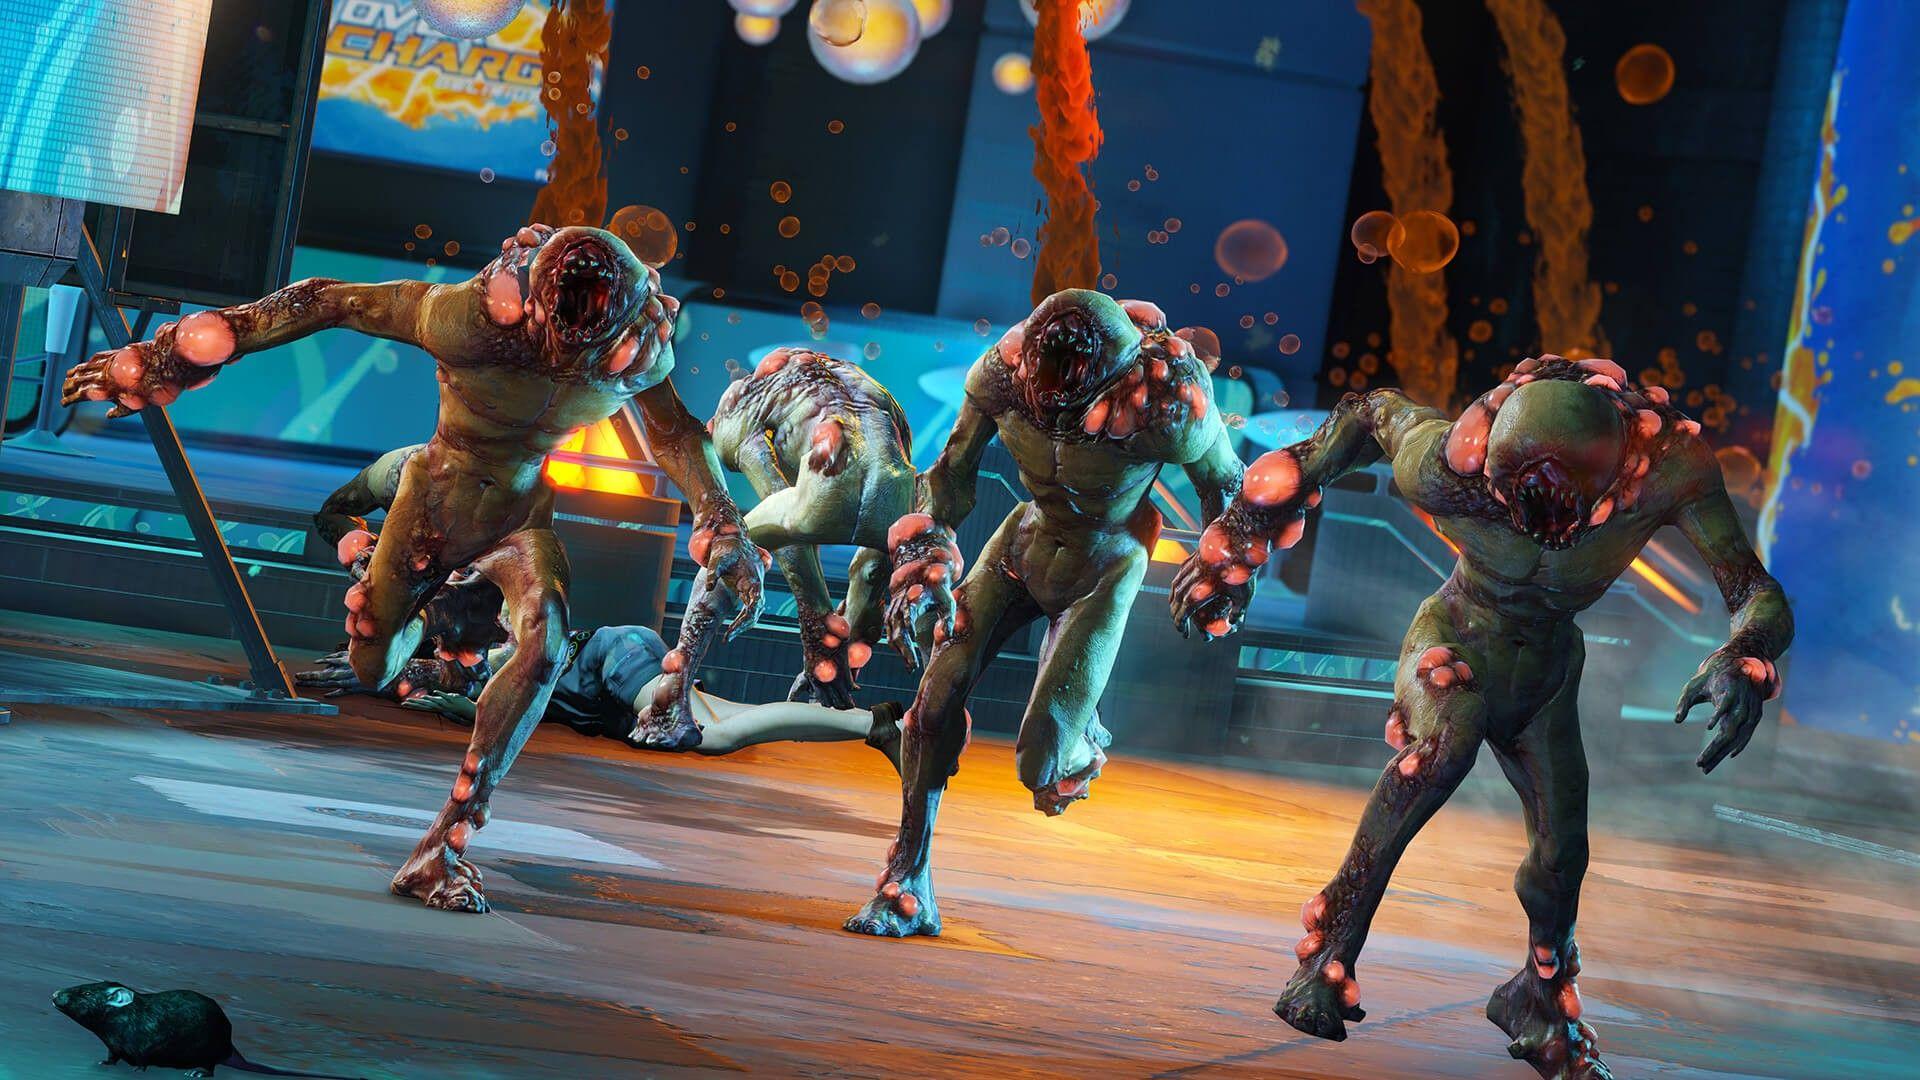 Sunset Overdrive' Takes Gamers On A Tour Of The Game's